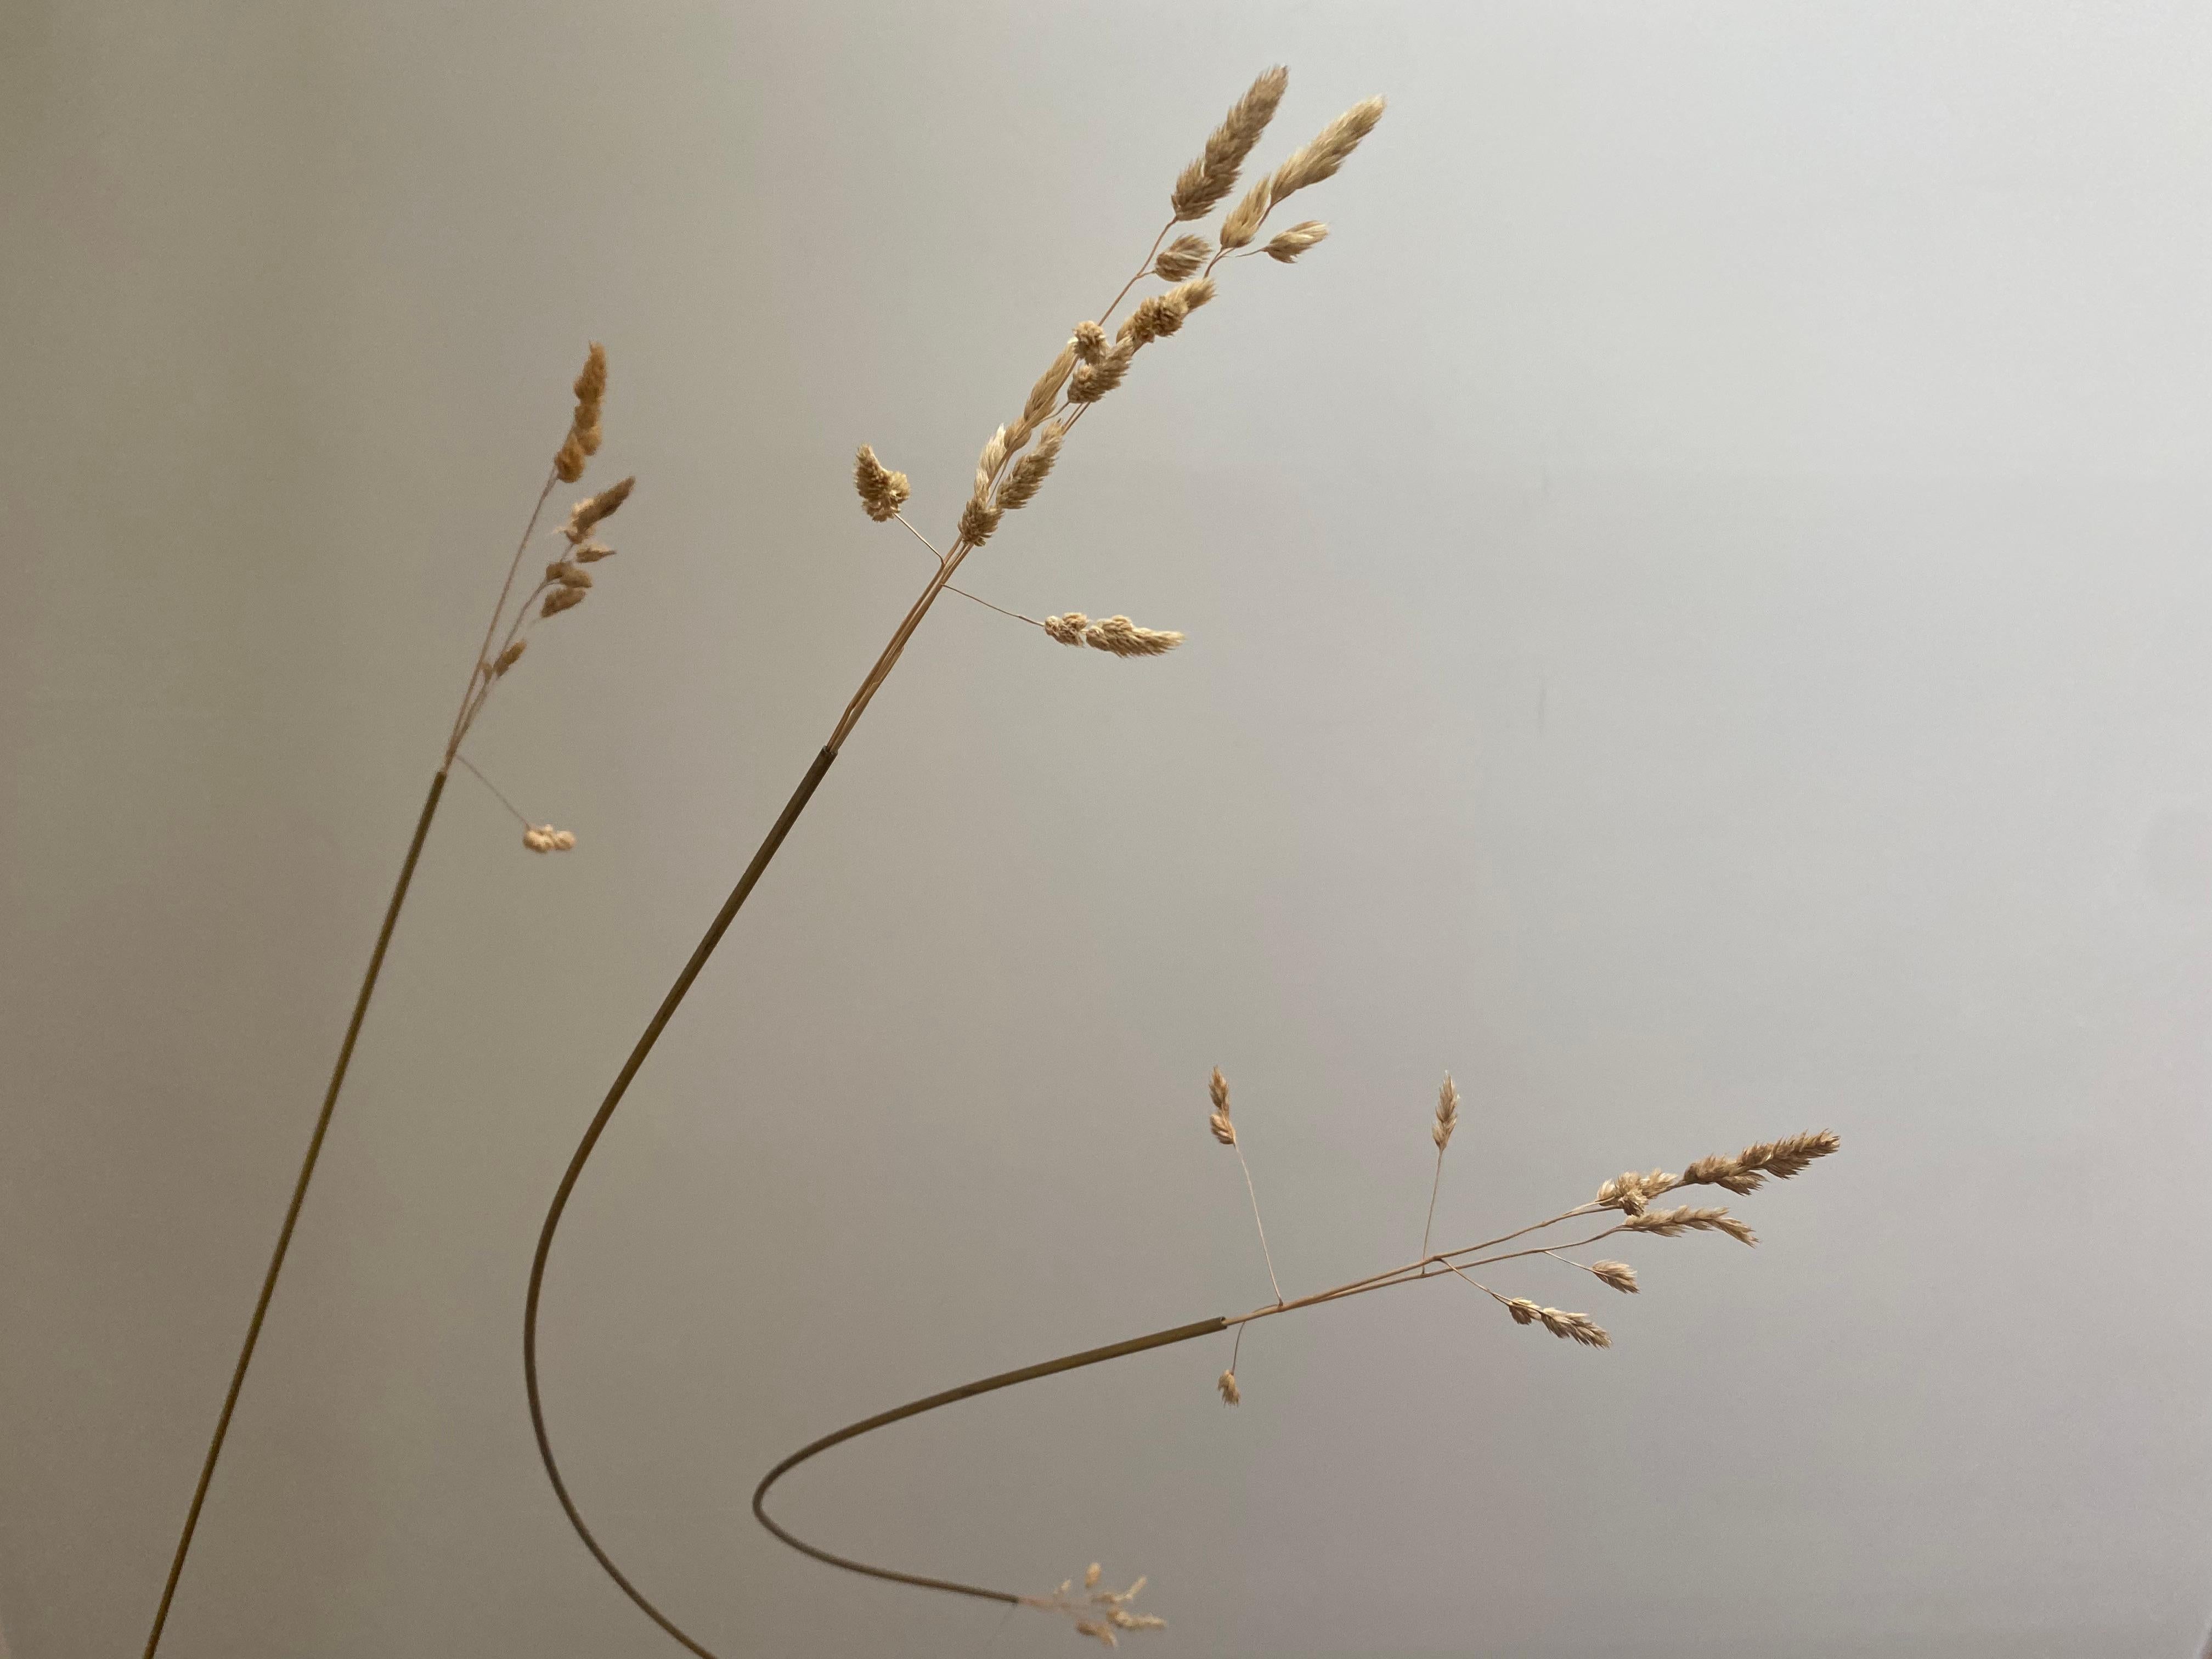 Dactyle Suspended Sculpture by Isola Design 
Materials: Brass, dactyle, nylon thread.
Dimensions: L 120 x H 80 cm.

This hanging sculpture was inspired by a grass, dactylis glomerata. 

In 2020, our limited horizon gave a completely different